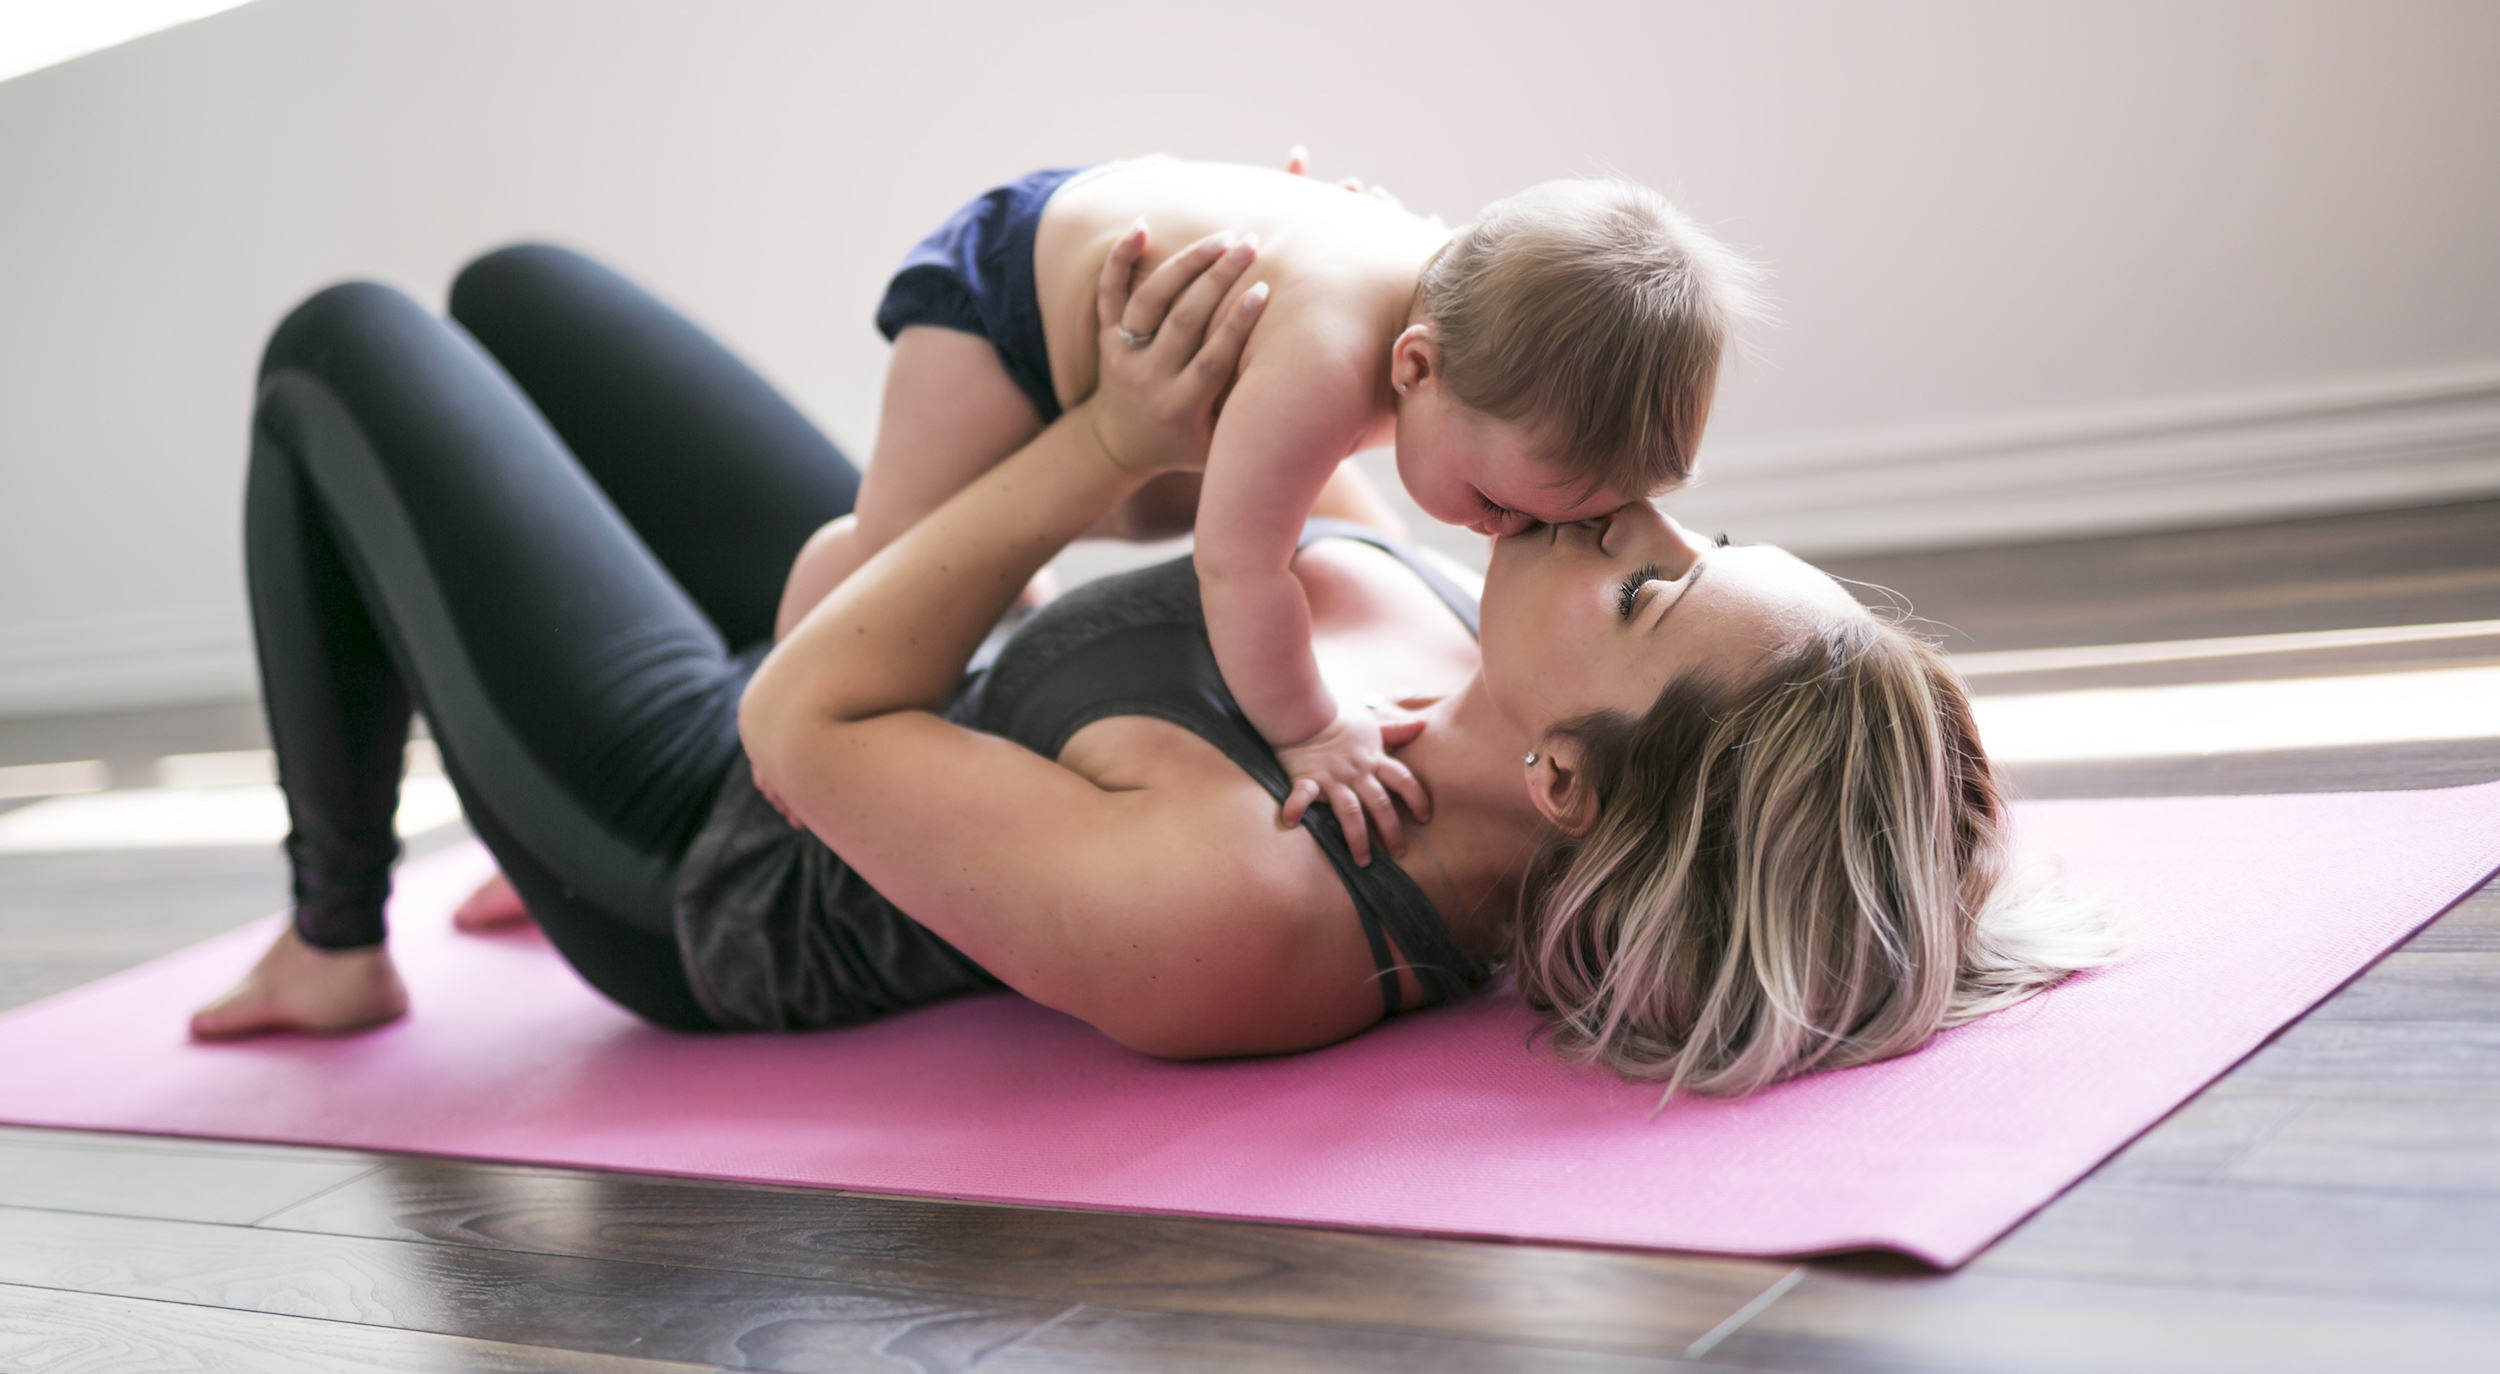 A young mother does physical yoga exercises together with her baby after a mommy makeover